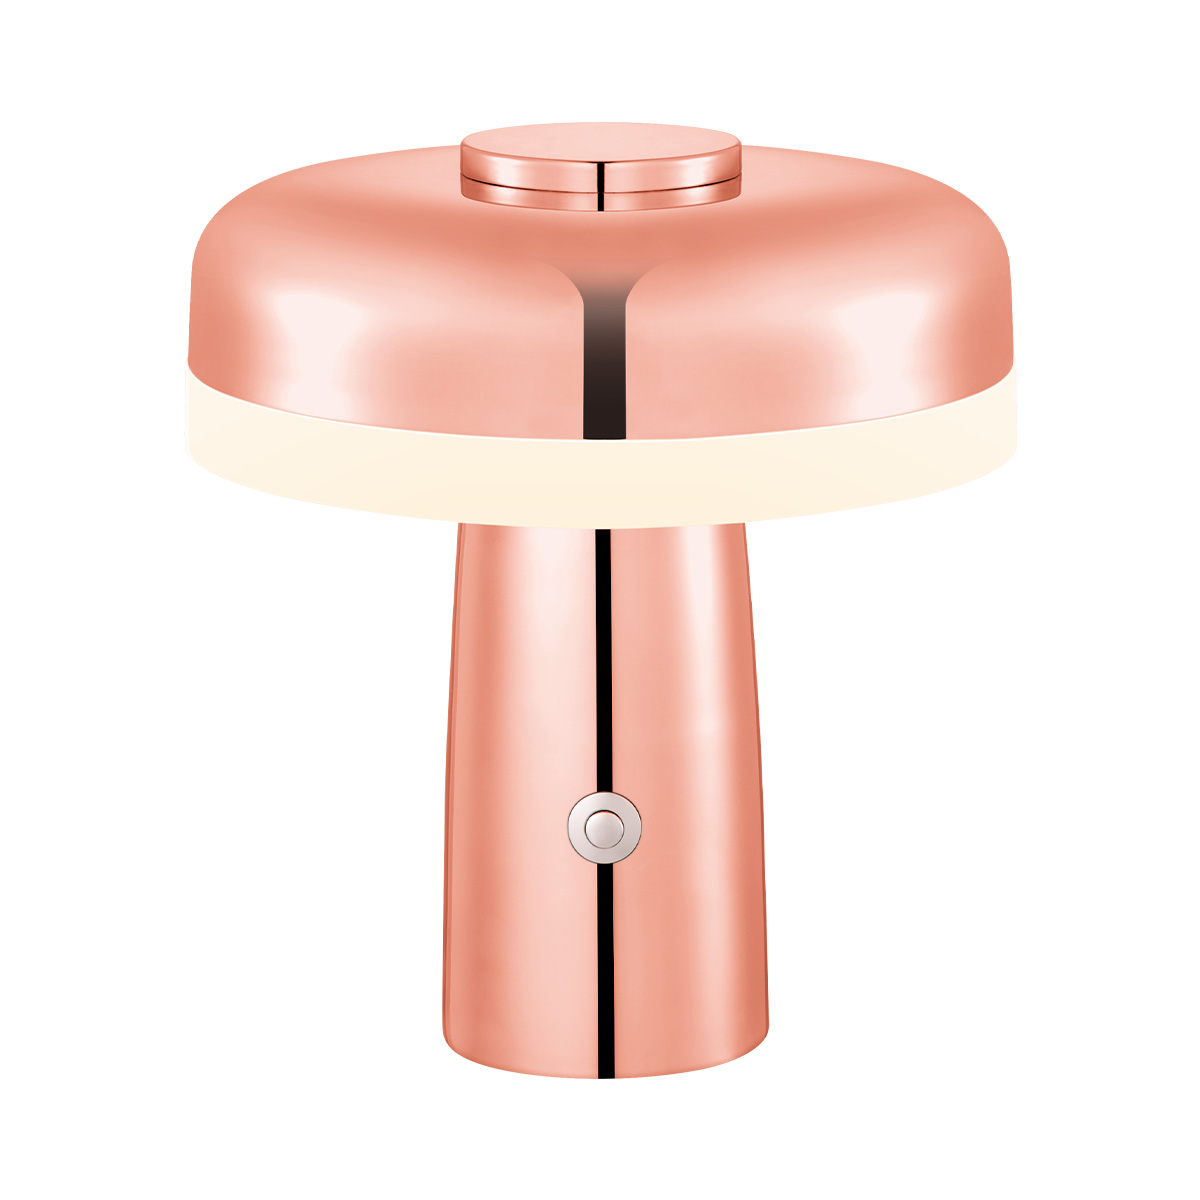 Tangla lighting - TLT7499-01CP - LED Table lamp - rechargeable metal and glass - copper - rechargeable